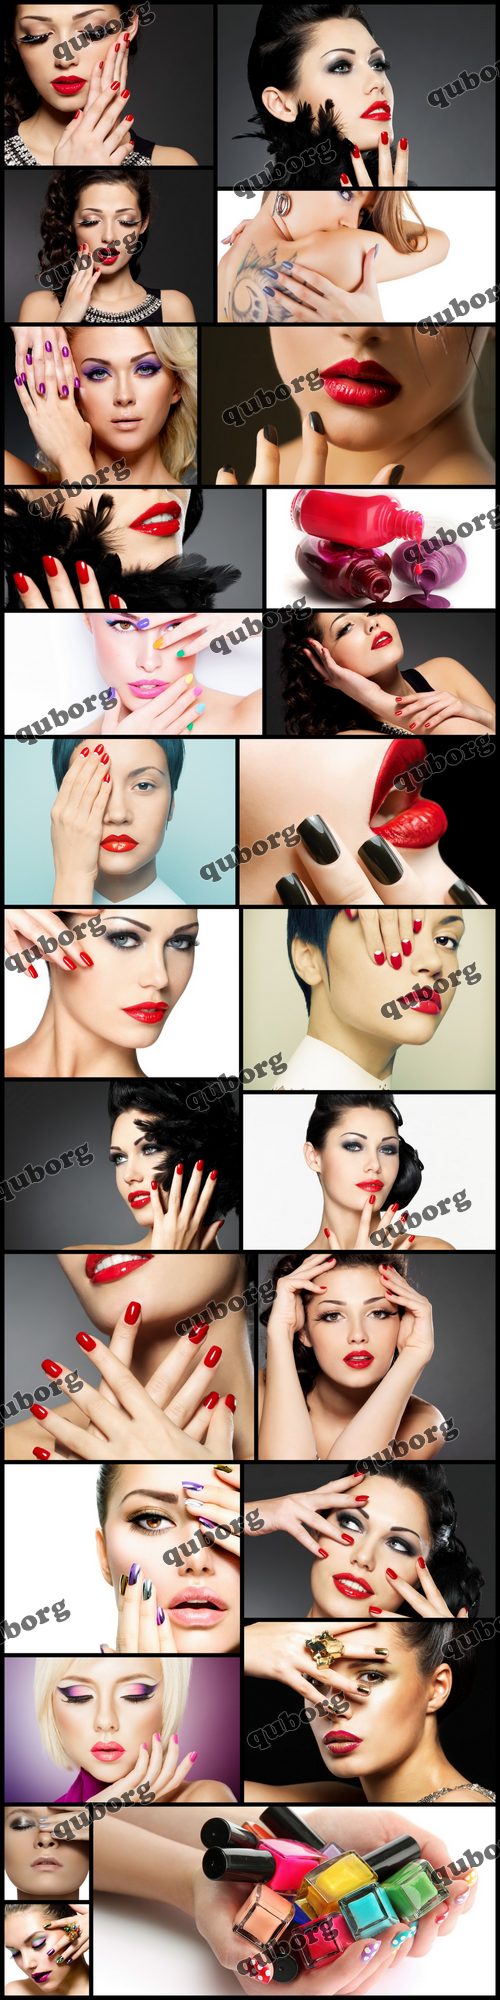 Stock Photos - Fashion Makeup and Manicure 3